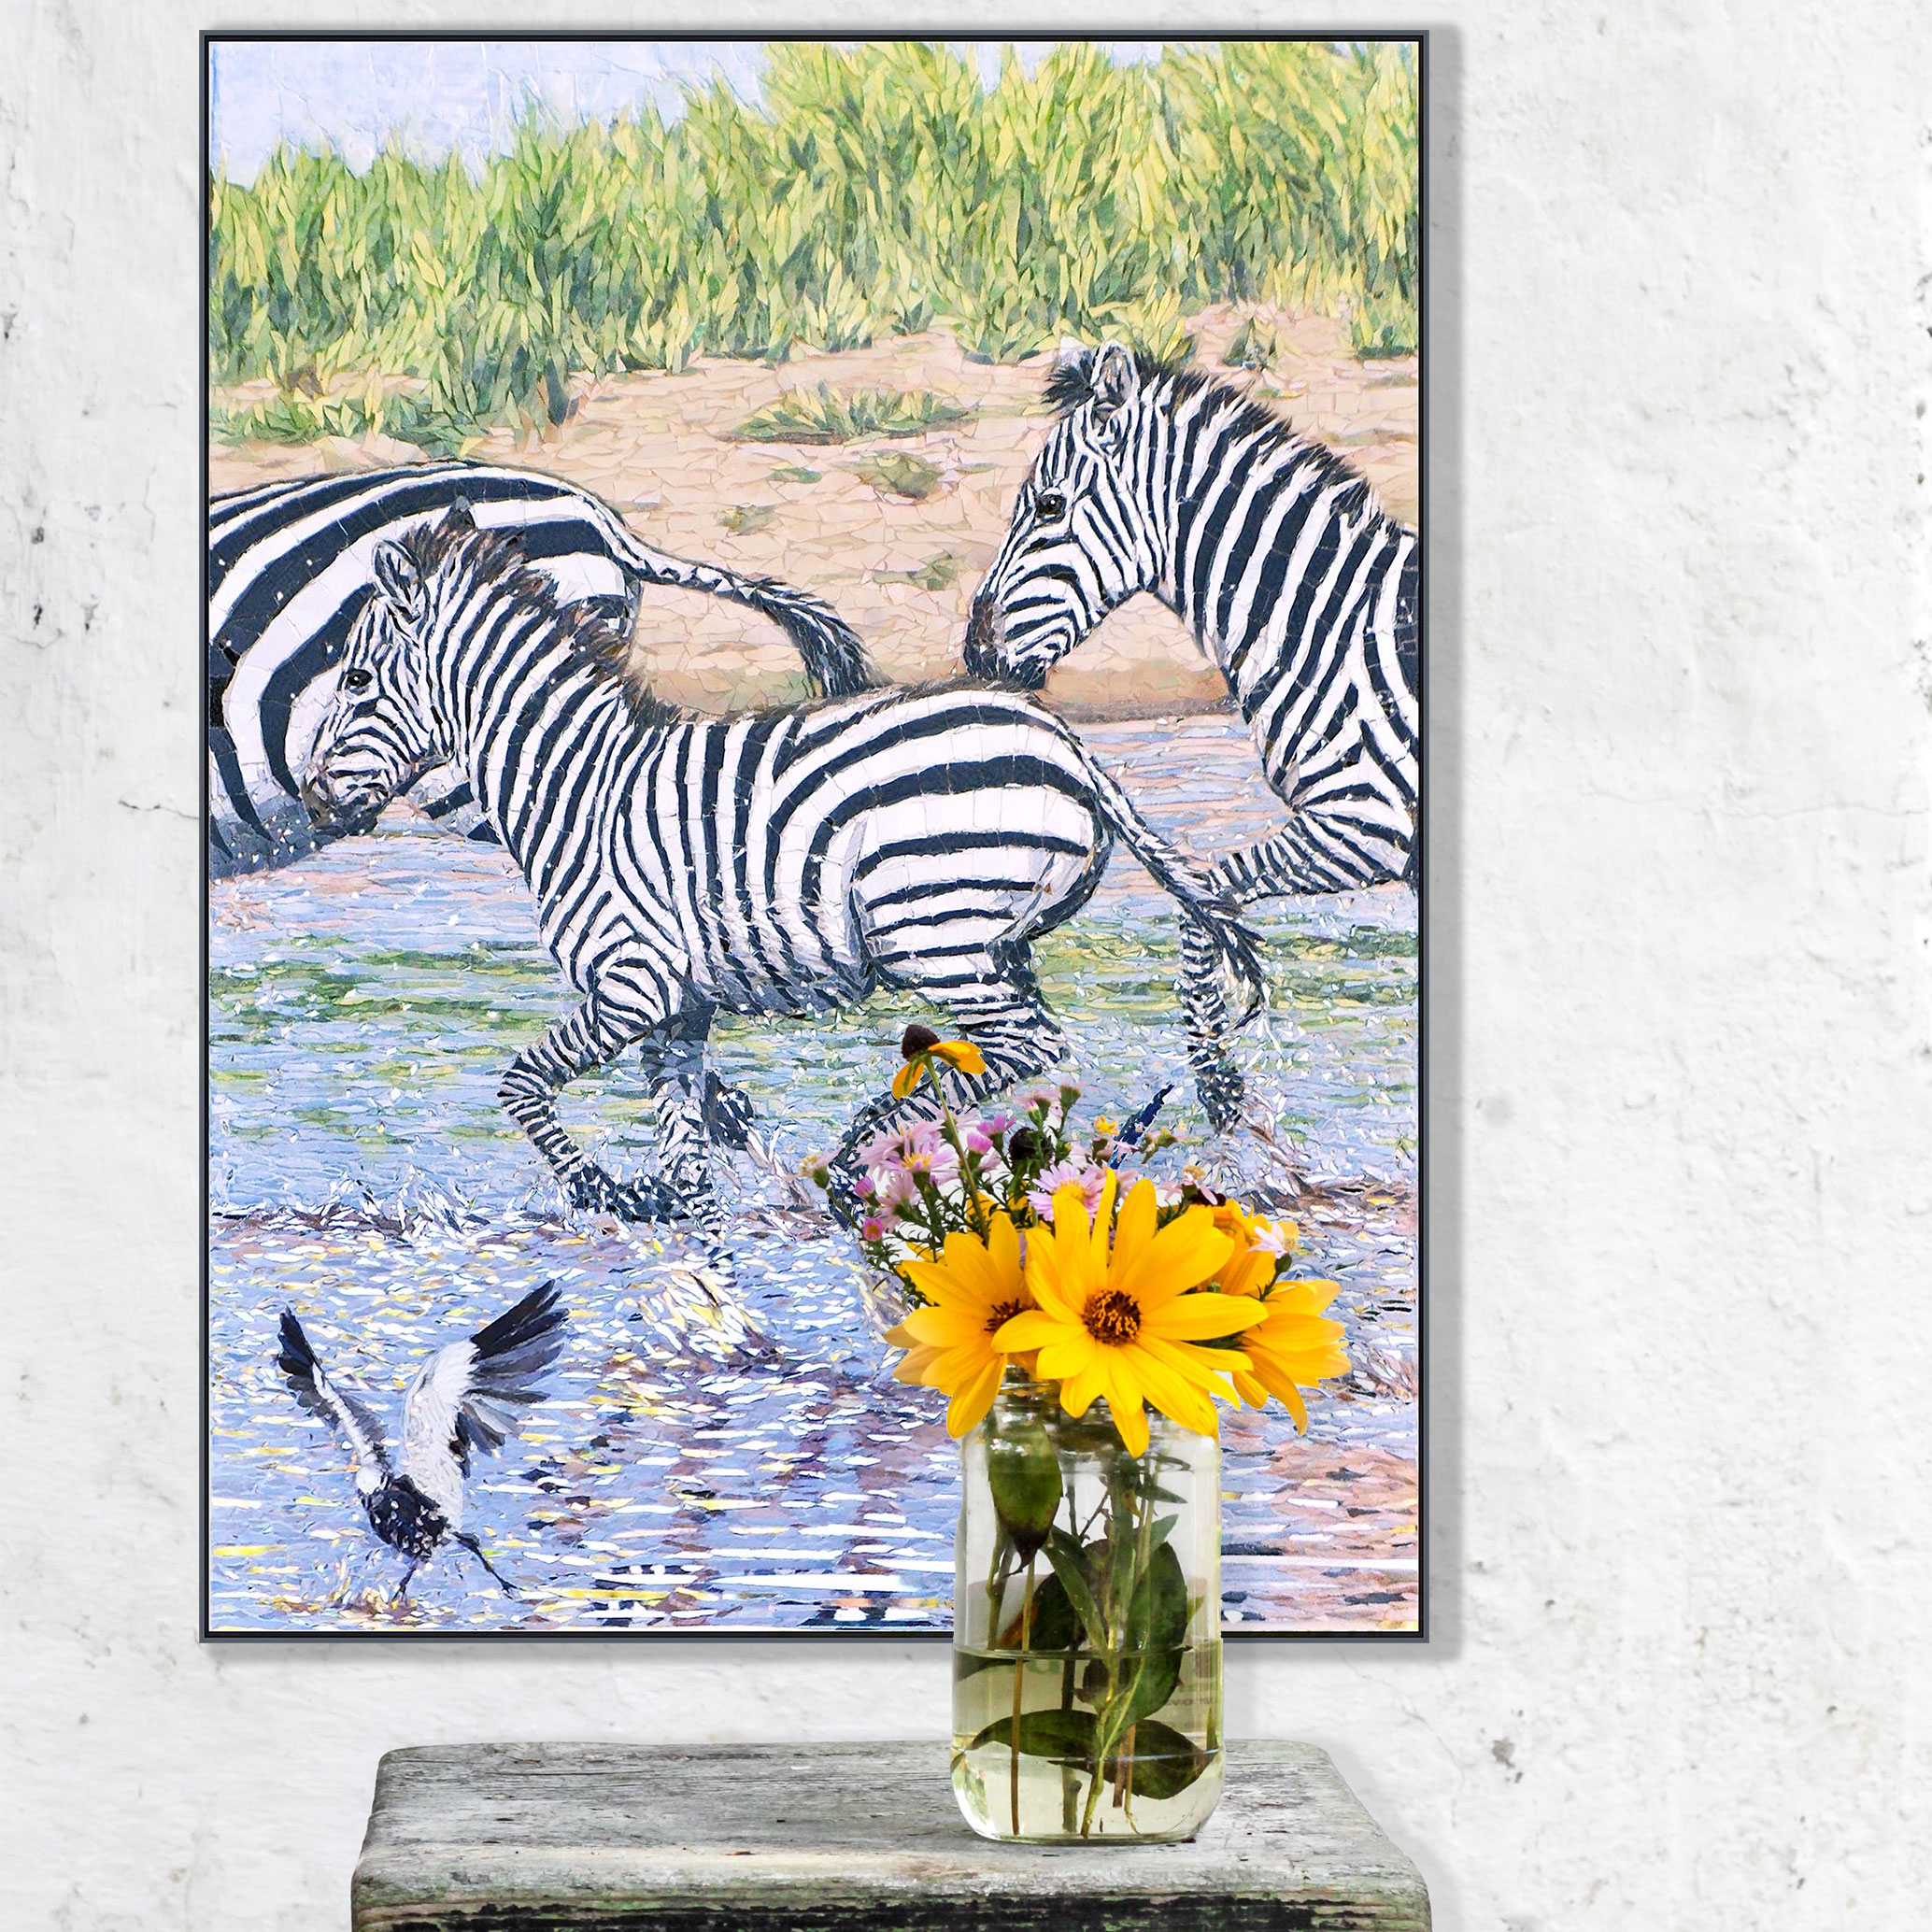 Title: “Splashing Out”<br/> 
Size: 42x60 cm<br/>
Price: SOLD (South Africa)<br/>  
Inspiration: Trying to catch the movement, reflection and colour of zebras running through water, while flushing up a pair of blacksmith plovers. 

Part of the 2021 Mosaic Association of Australia and New Zealand juried exhibition